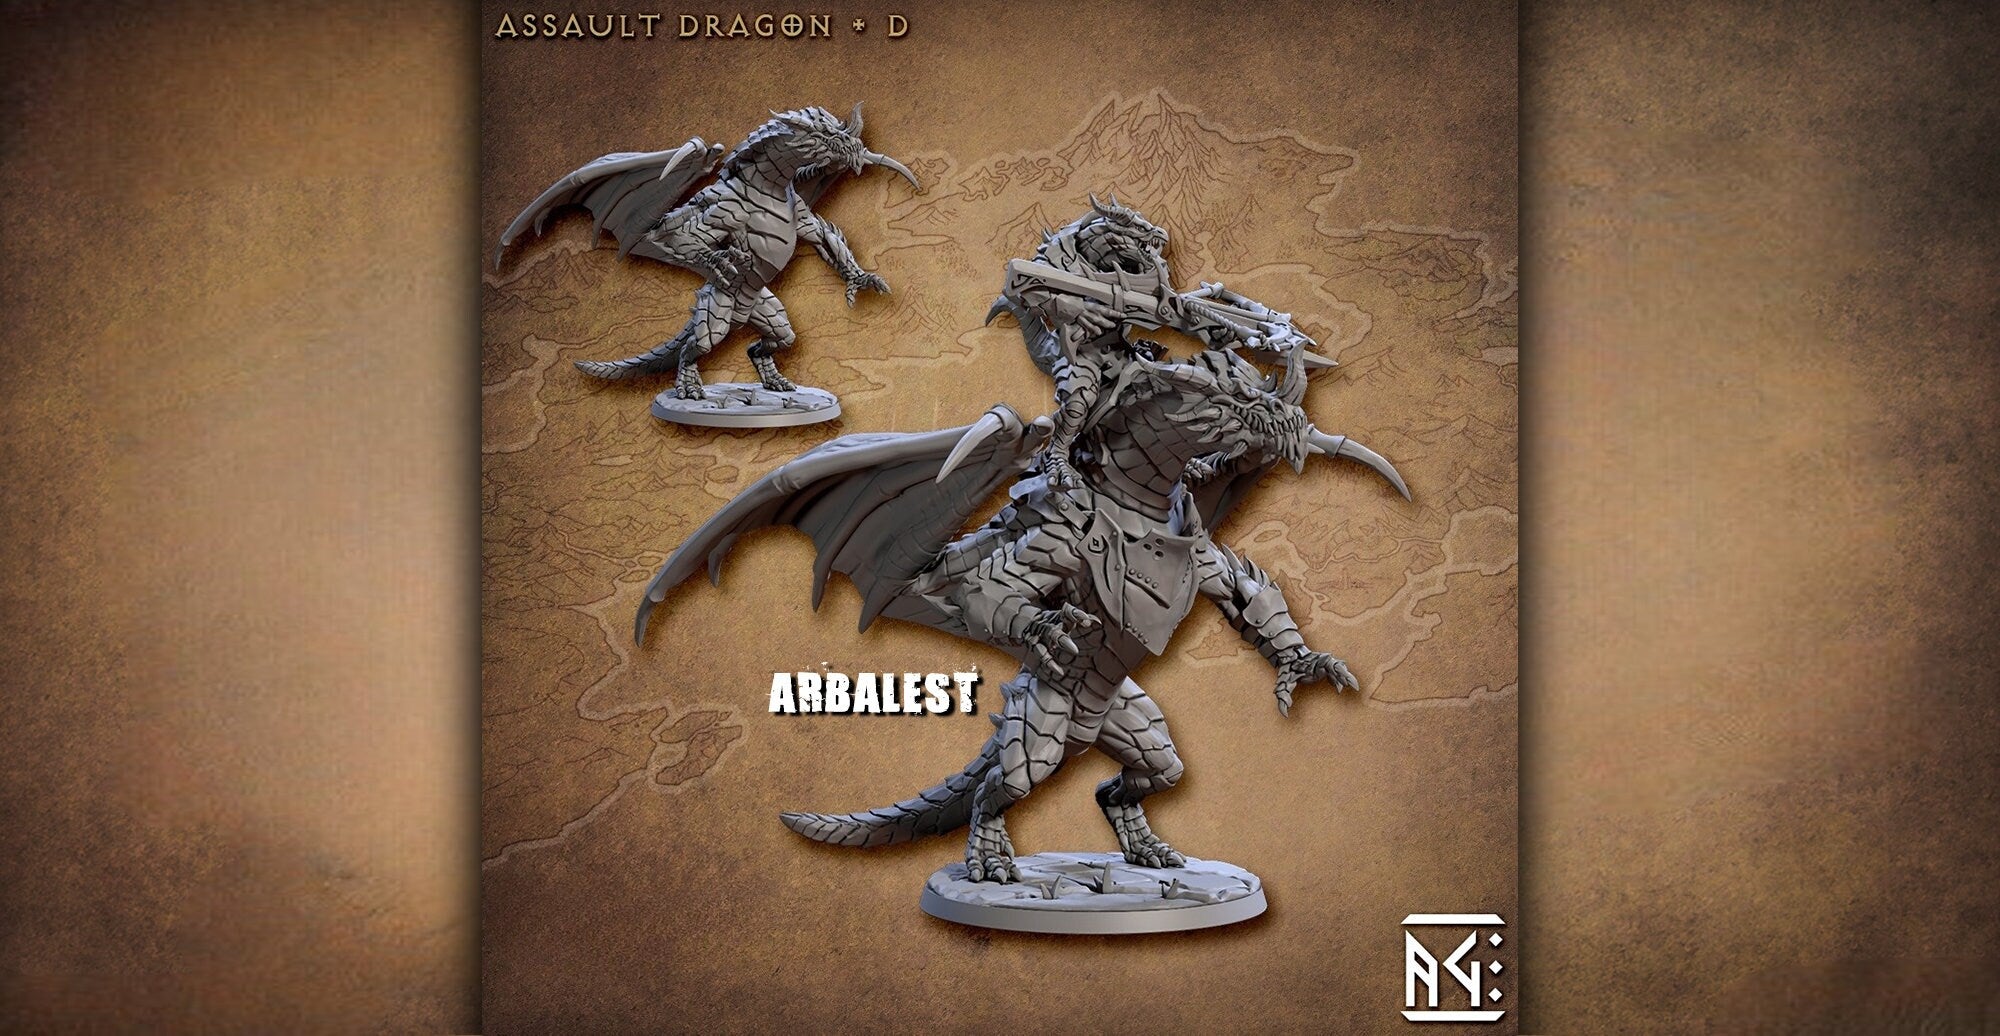 Dragon "Assault Dragon D" (+Rider) | Dungeons and Dragons | DnD | Pathfinder | TTRPG | Wargaming | RPG | Hero Size | 28-32 mm-Role Playing Miniatures